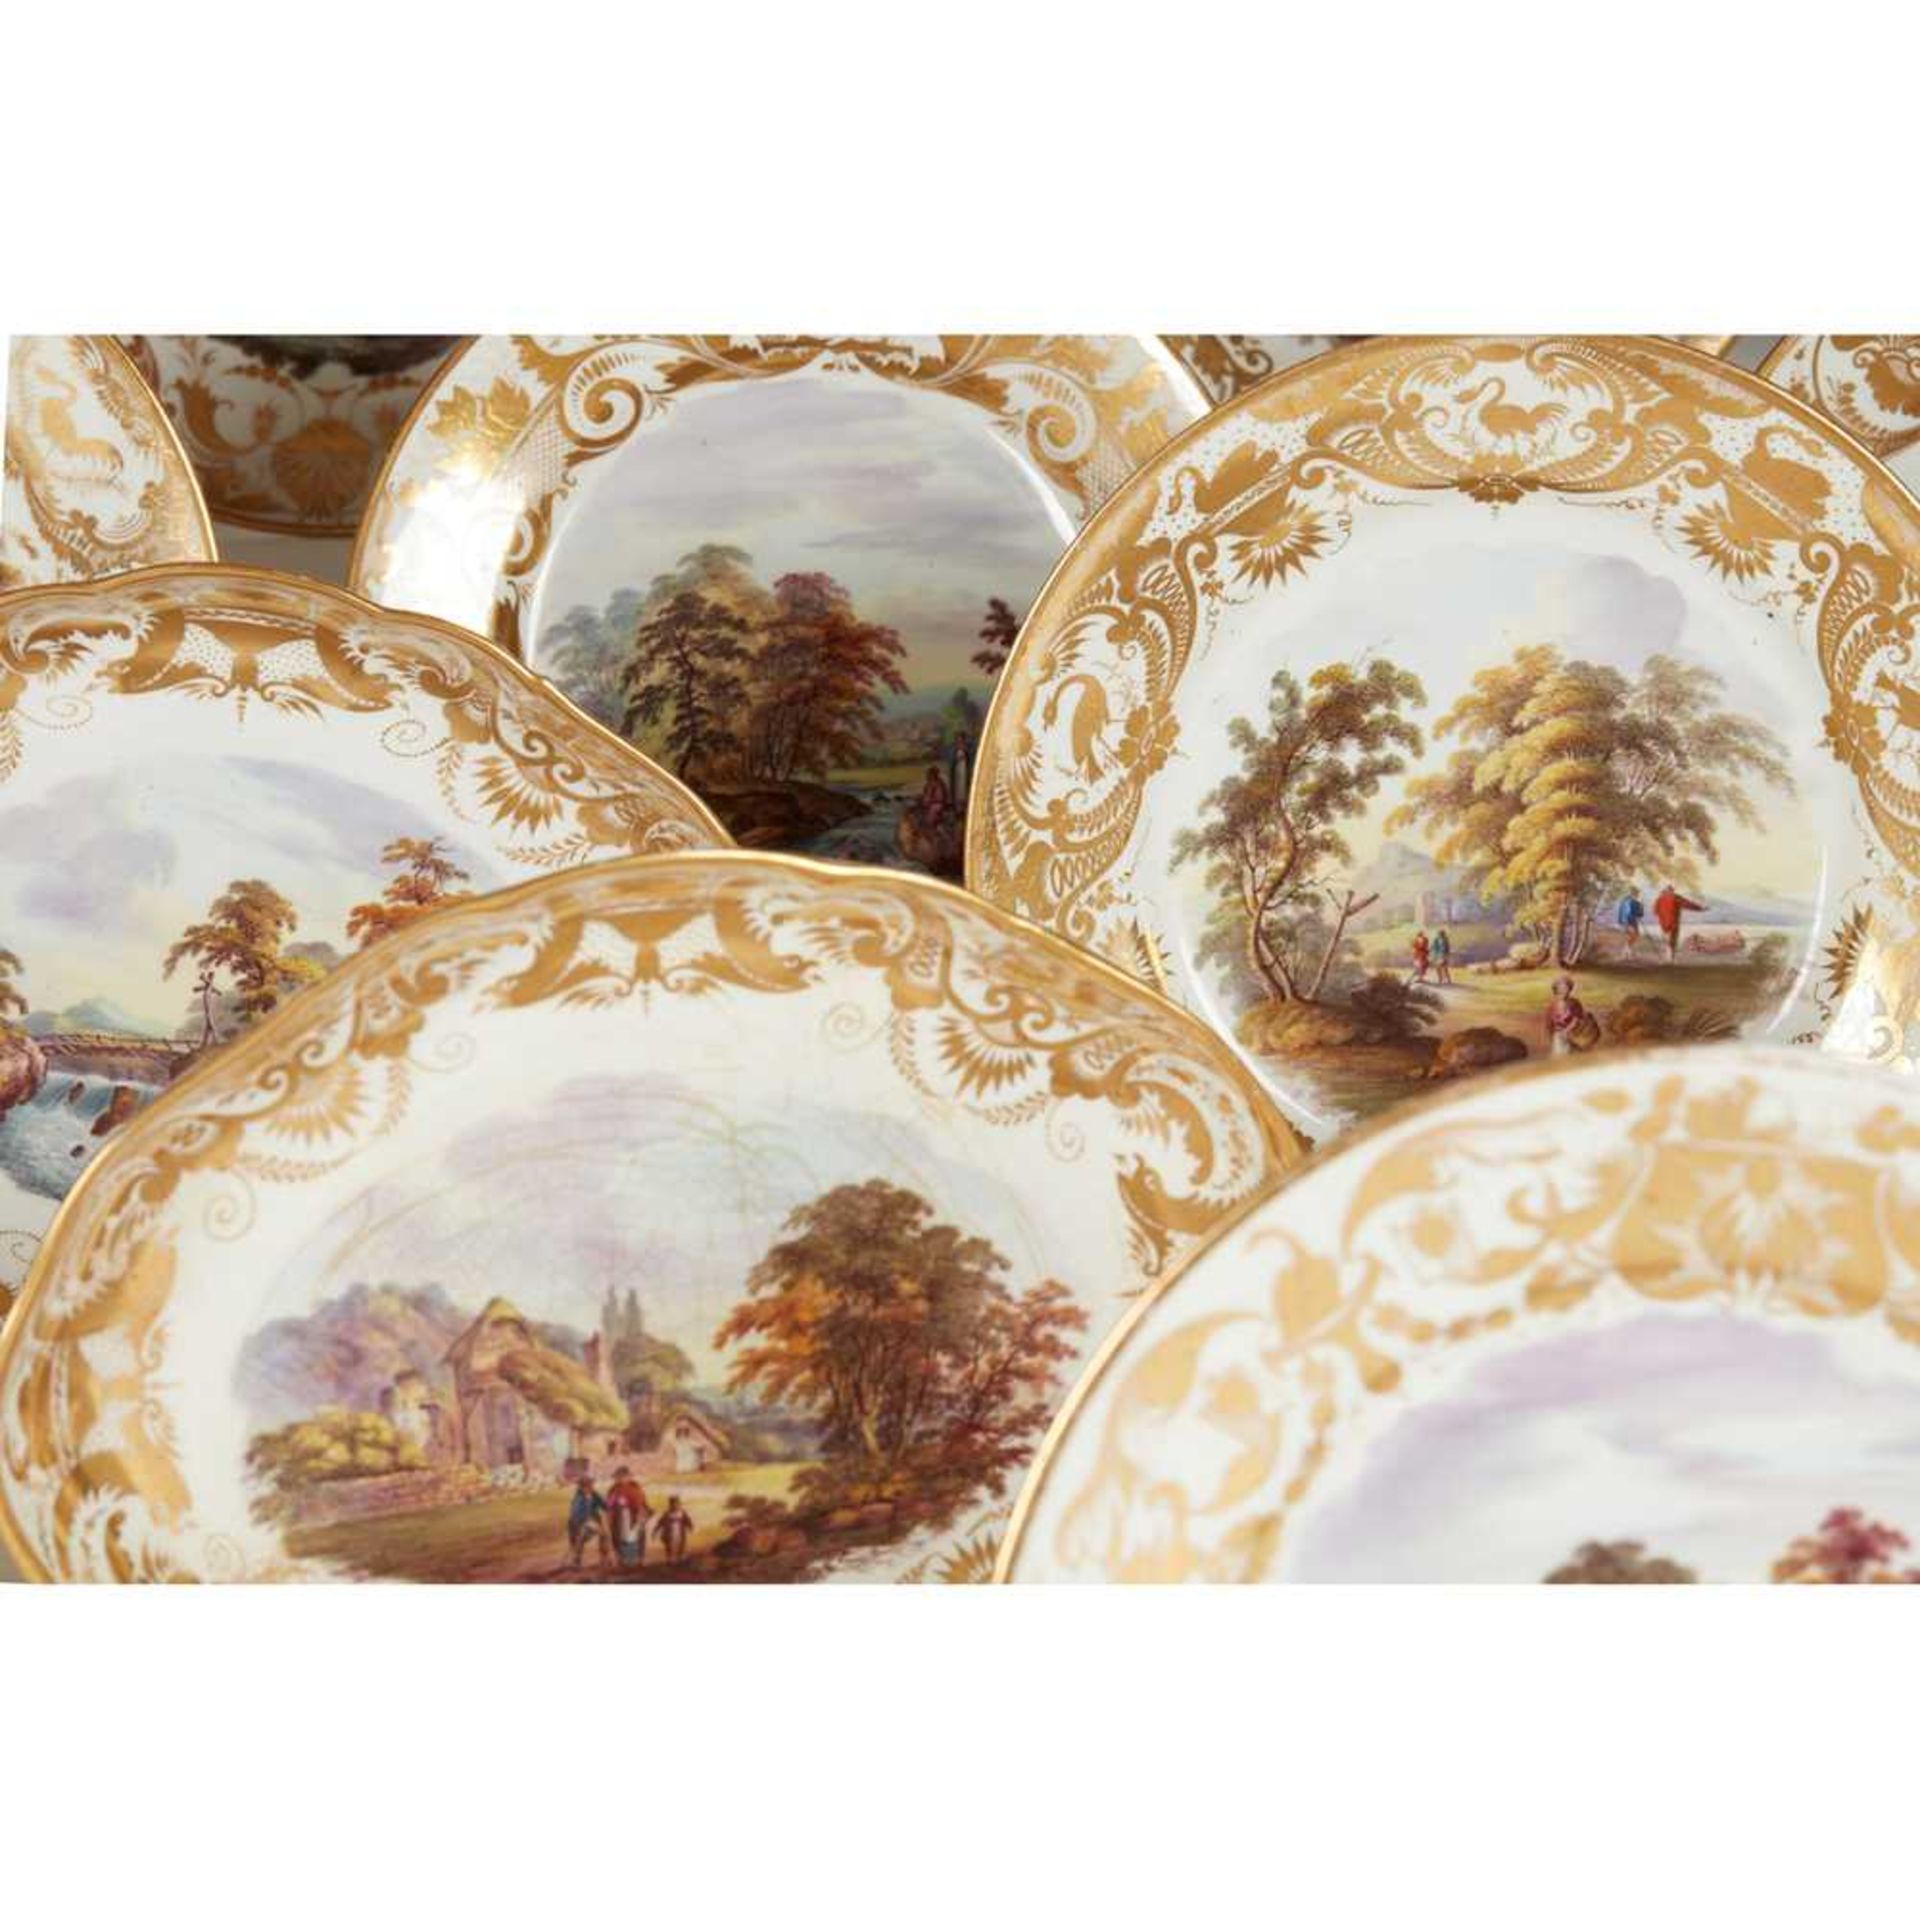 MATCHED DERBY PORCELAIN TOPOGRAPHICAL PART DESSERT SERVICE EARLY 19TH CENTURY - Image 7 of 8